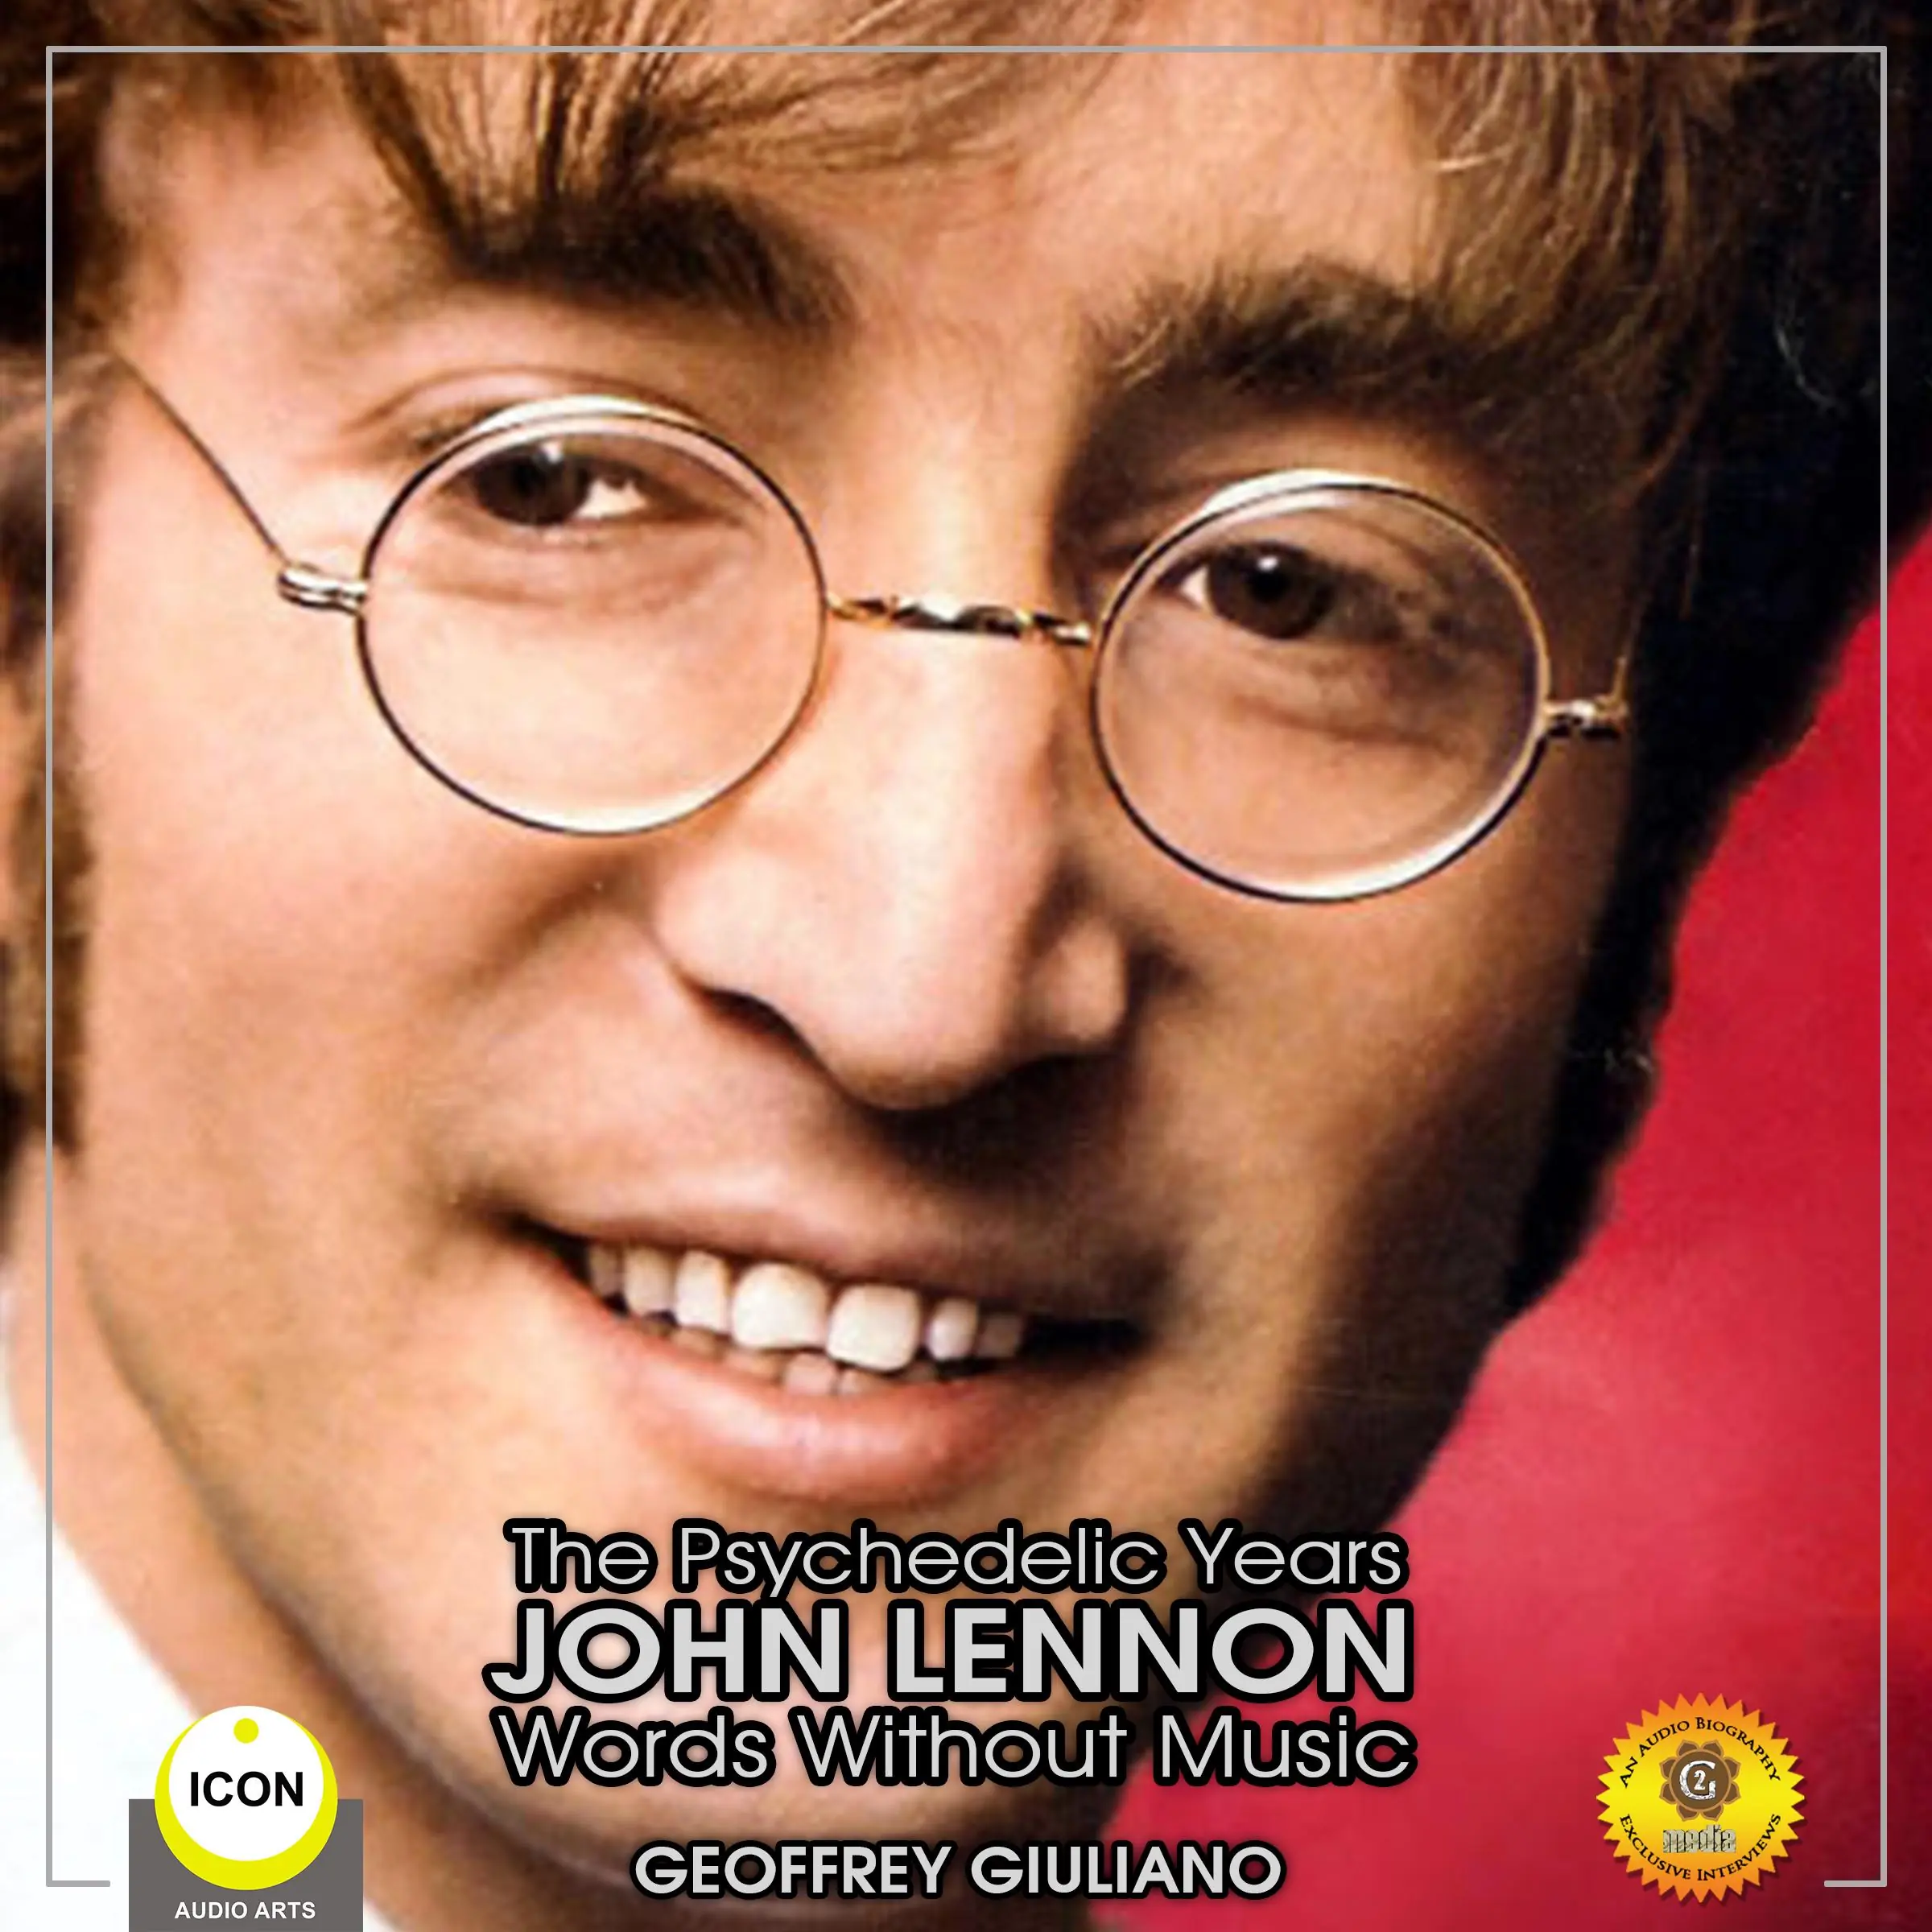 The Psychedelic Years John Lennon - Words Without Music by Geoffrey Giuliano Audiobook